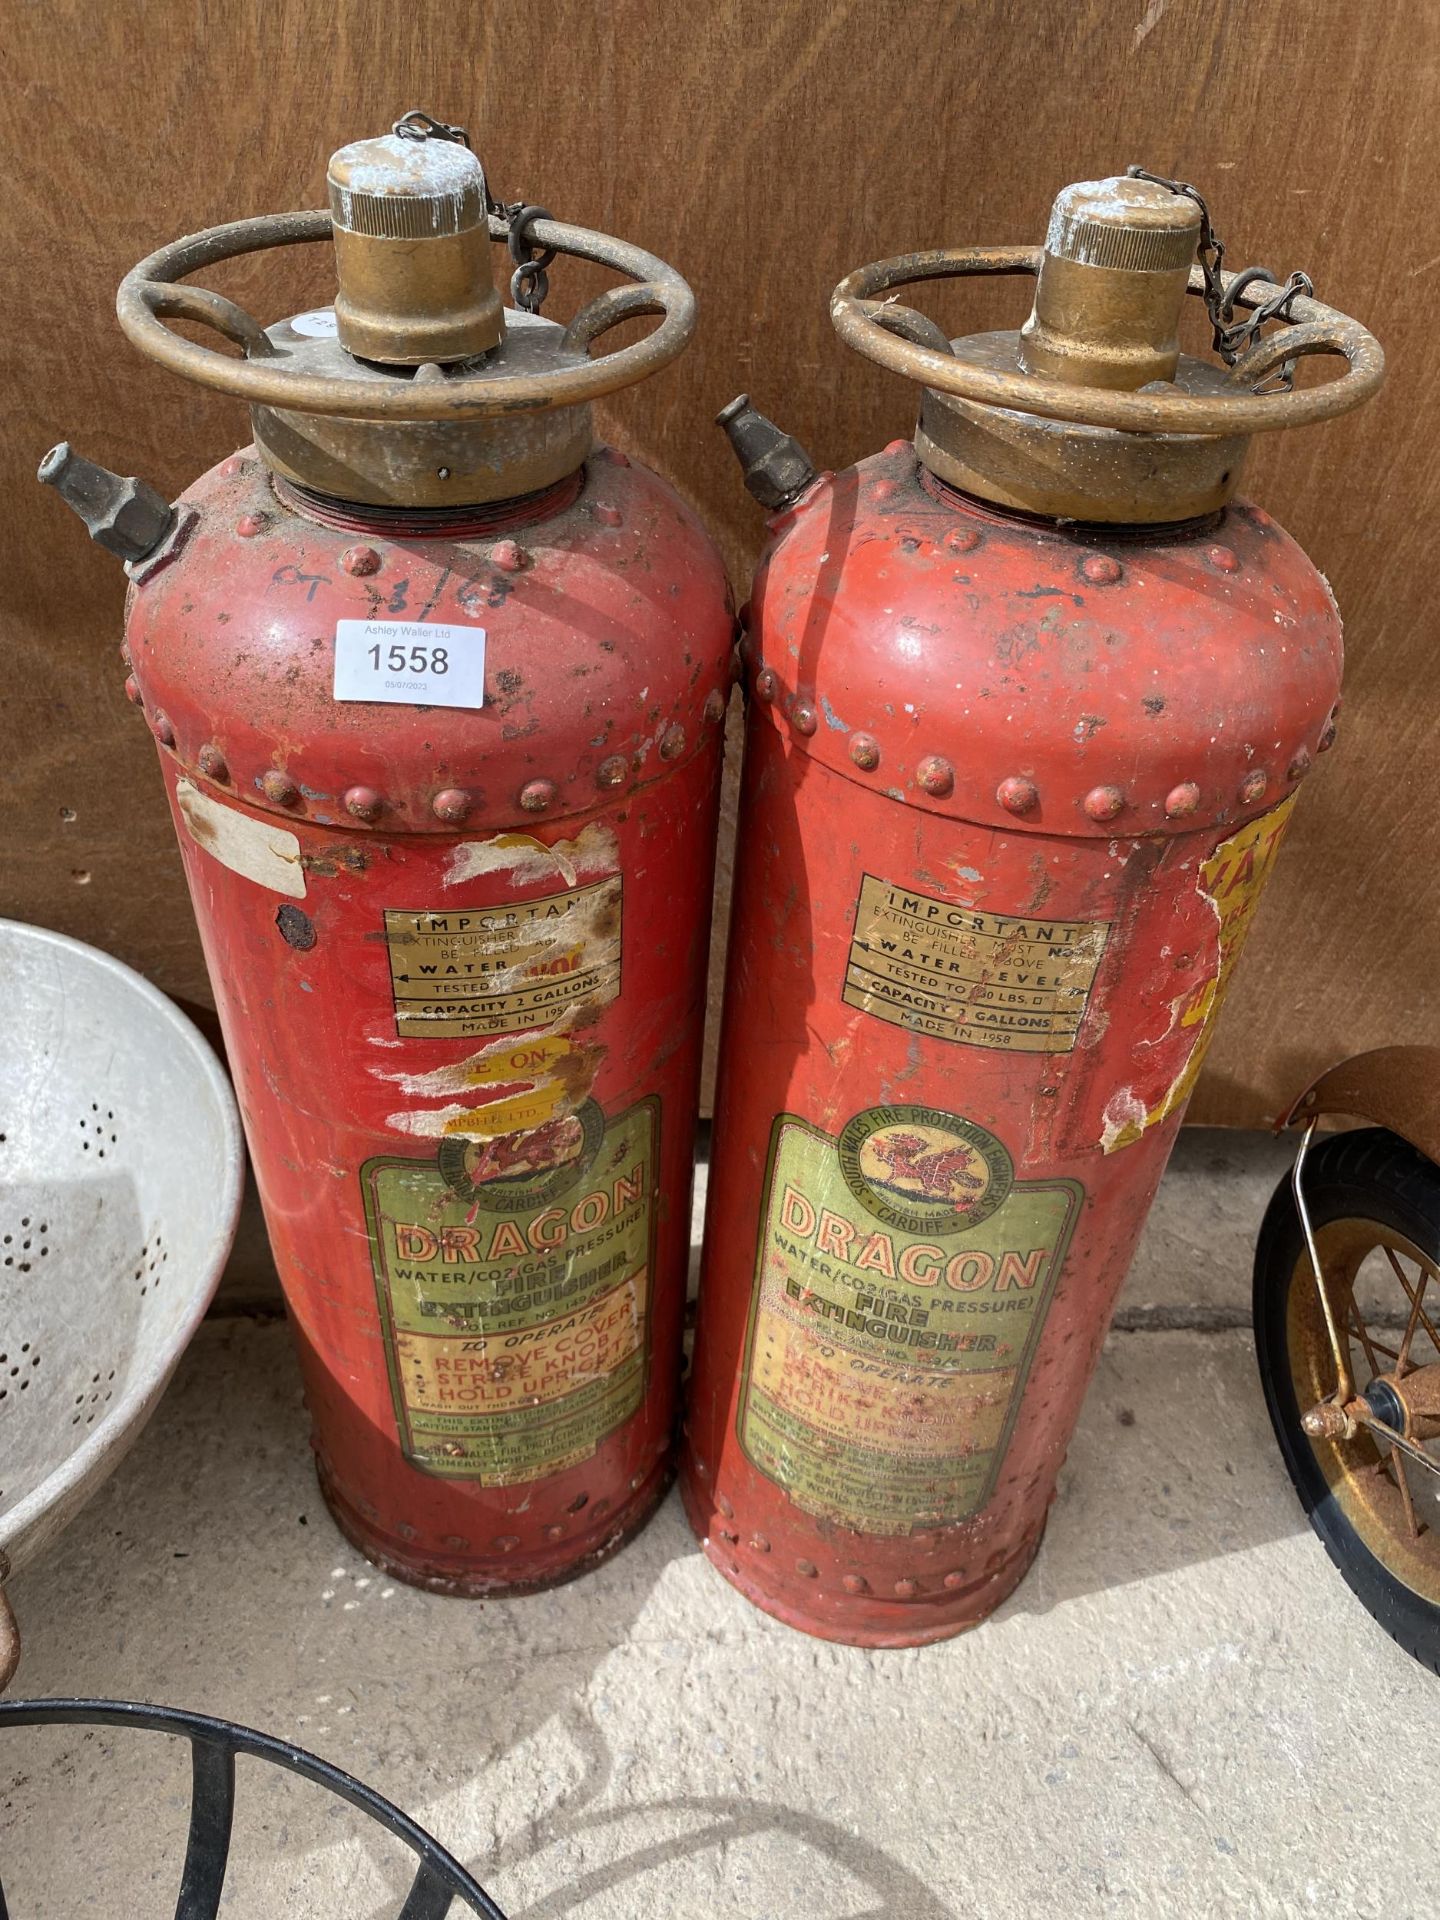 A PAIR OF DRAGON FIRE EXTINGUISHERS